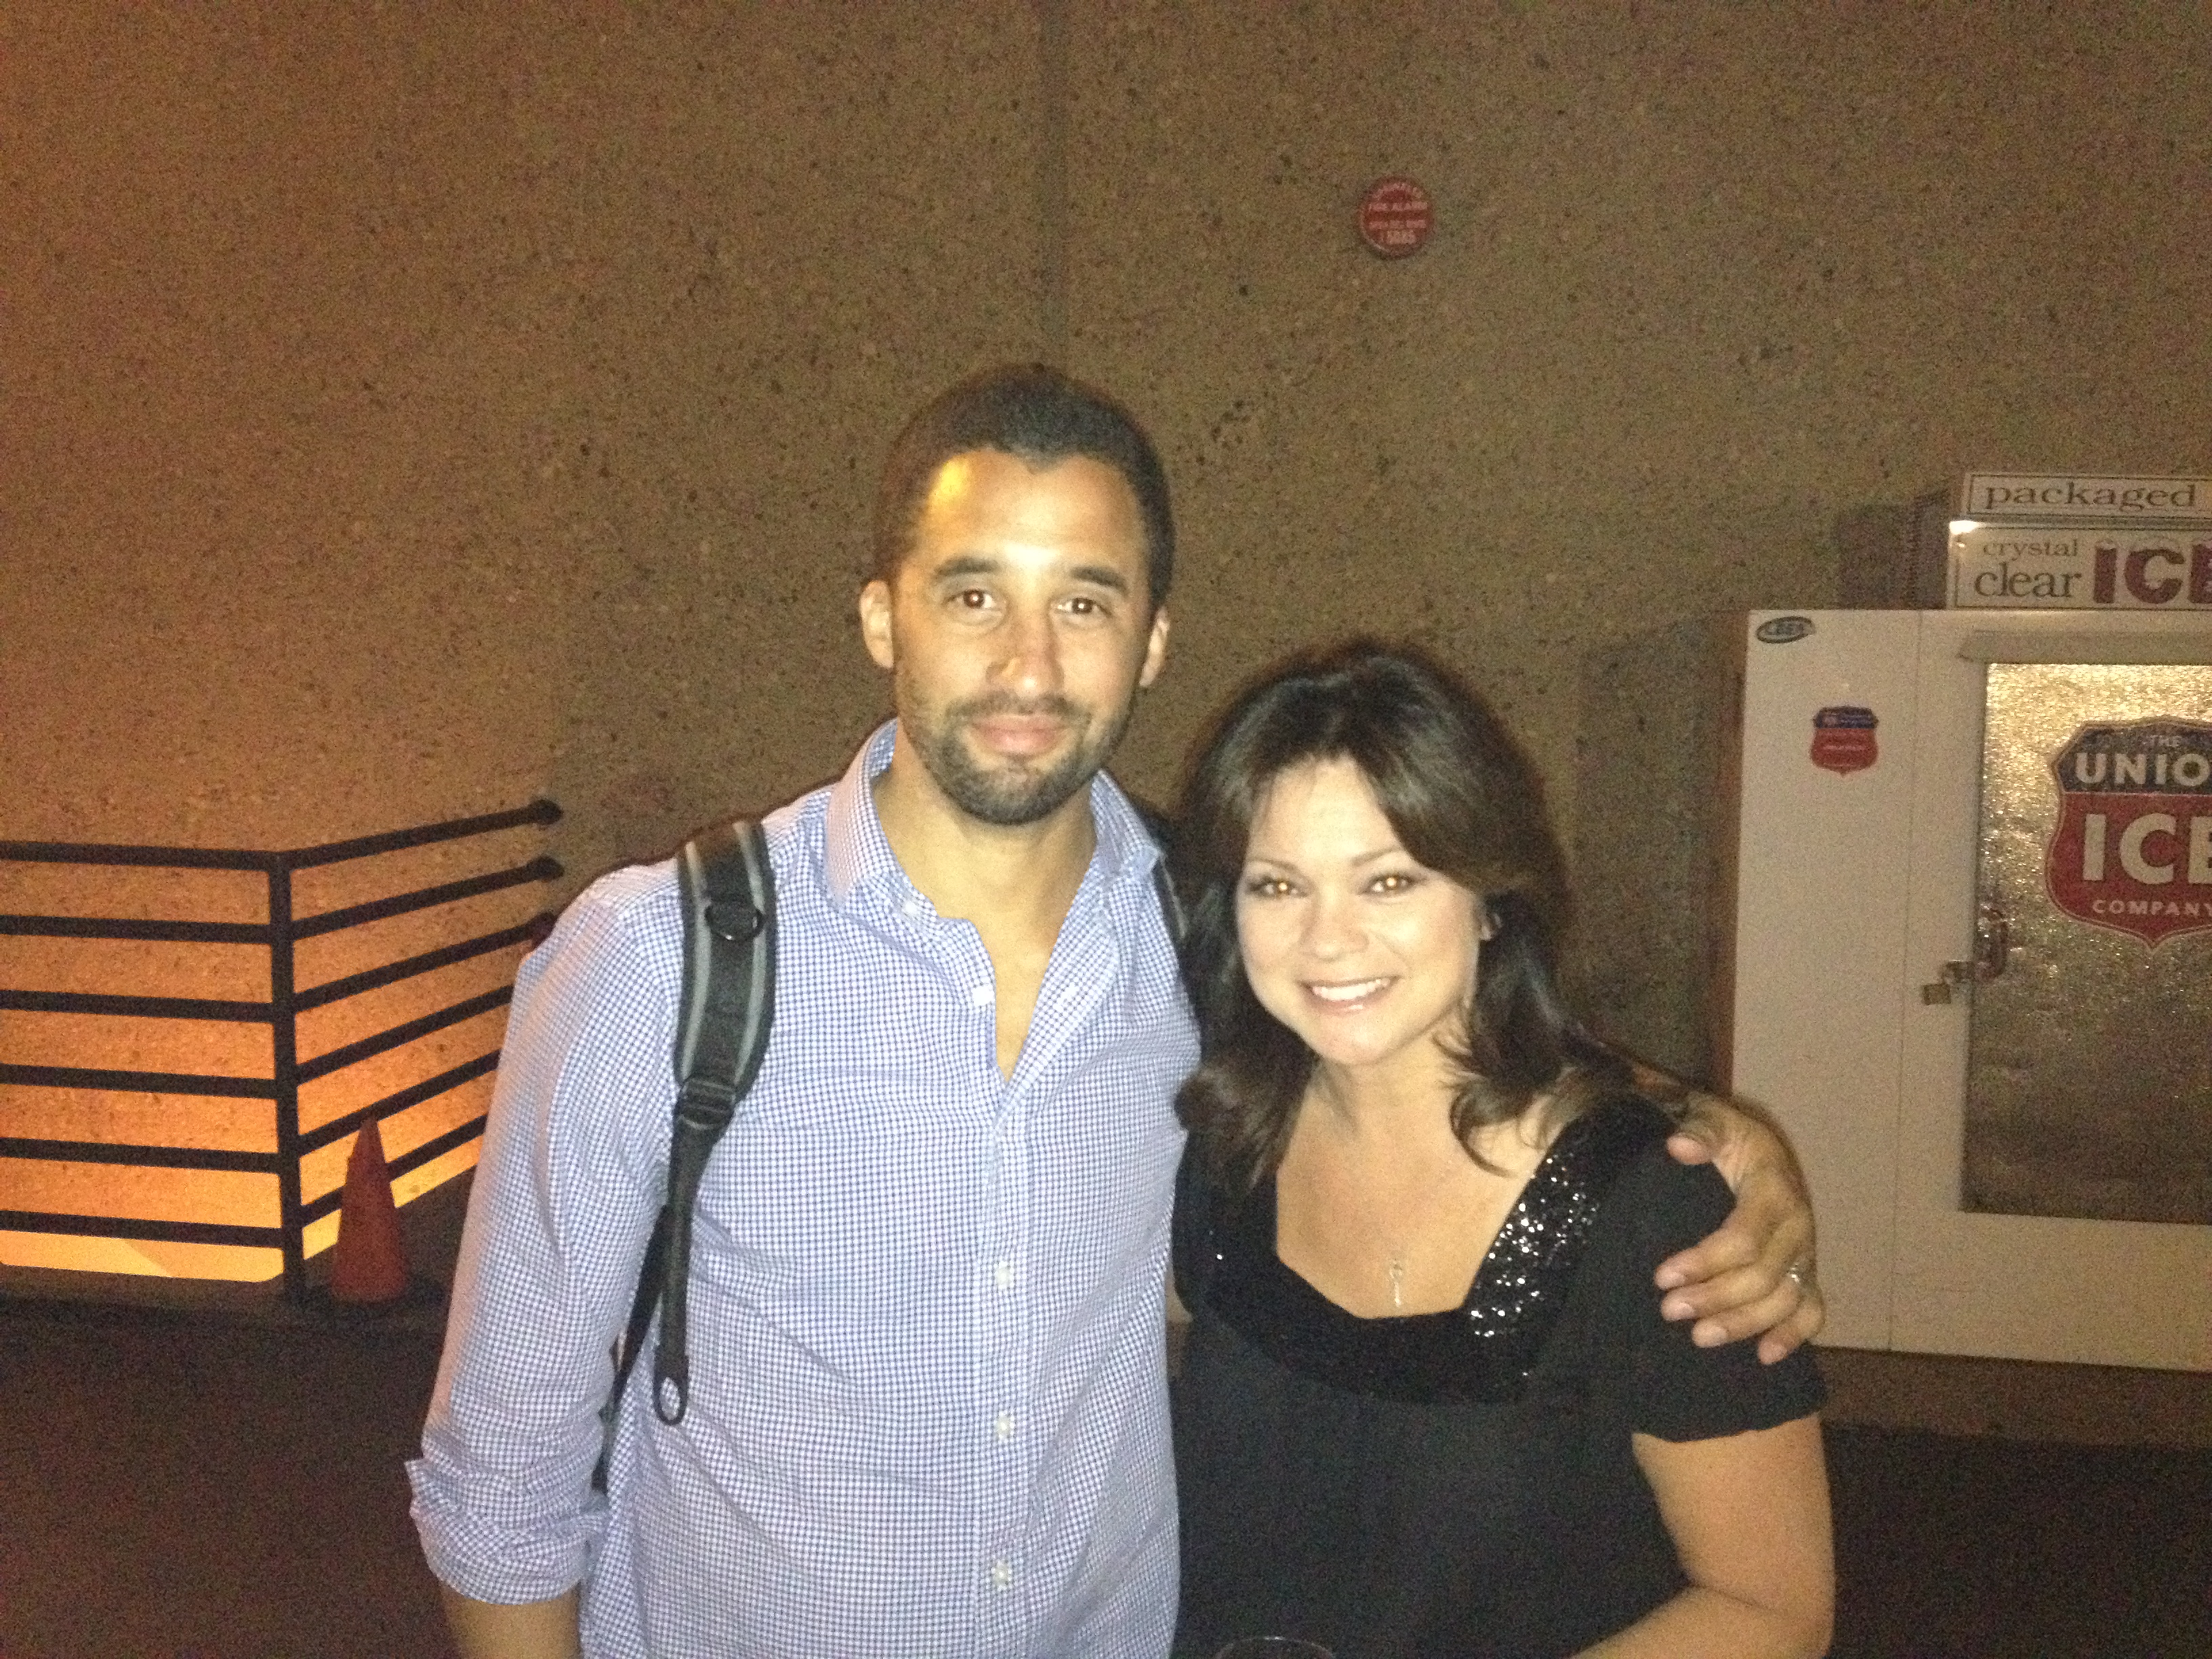 Justin Wade with Valerie Bertinelli on the set of 